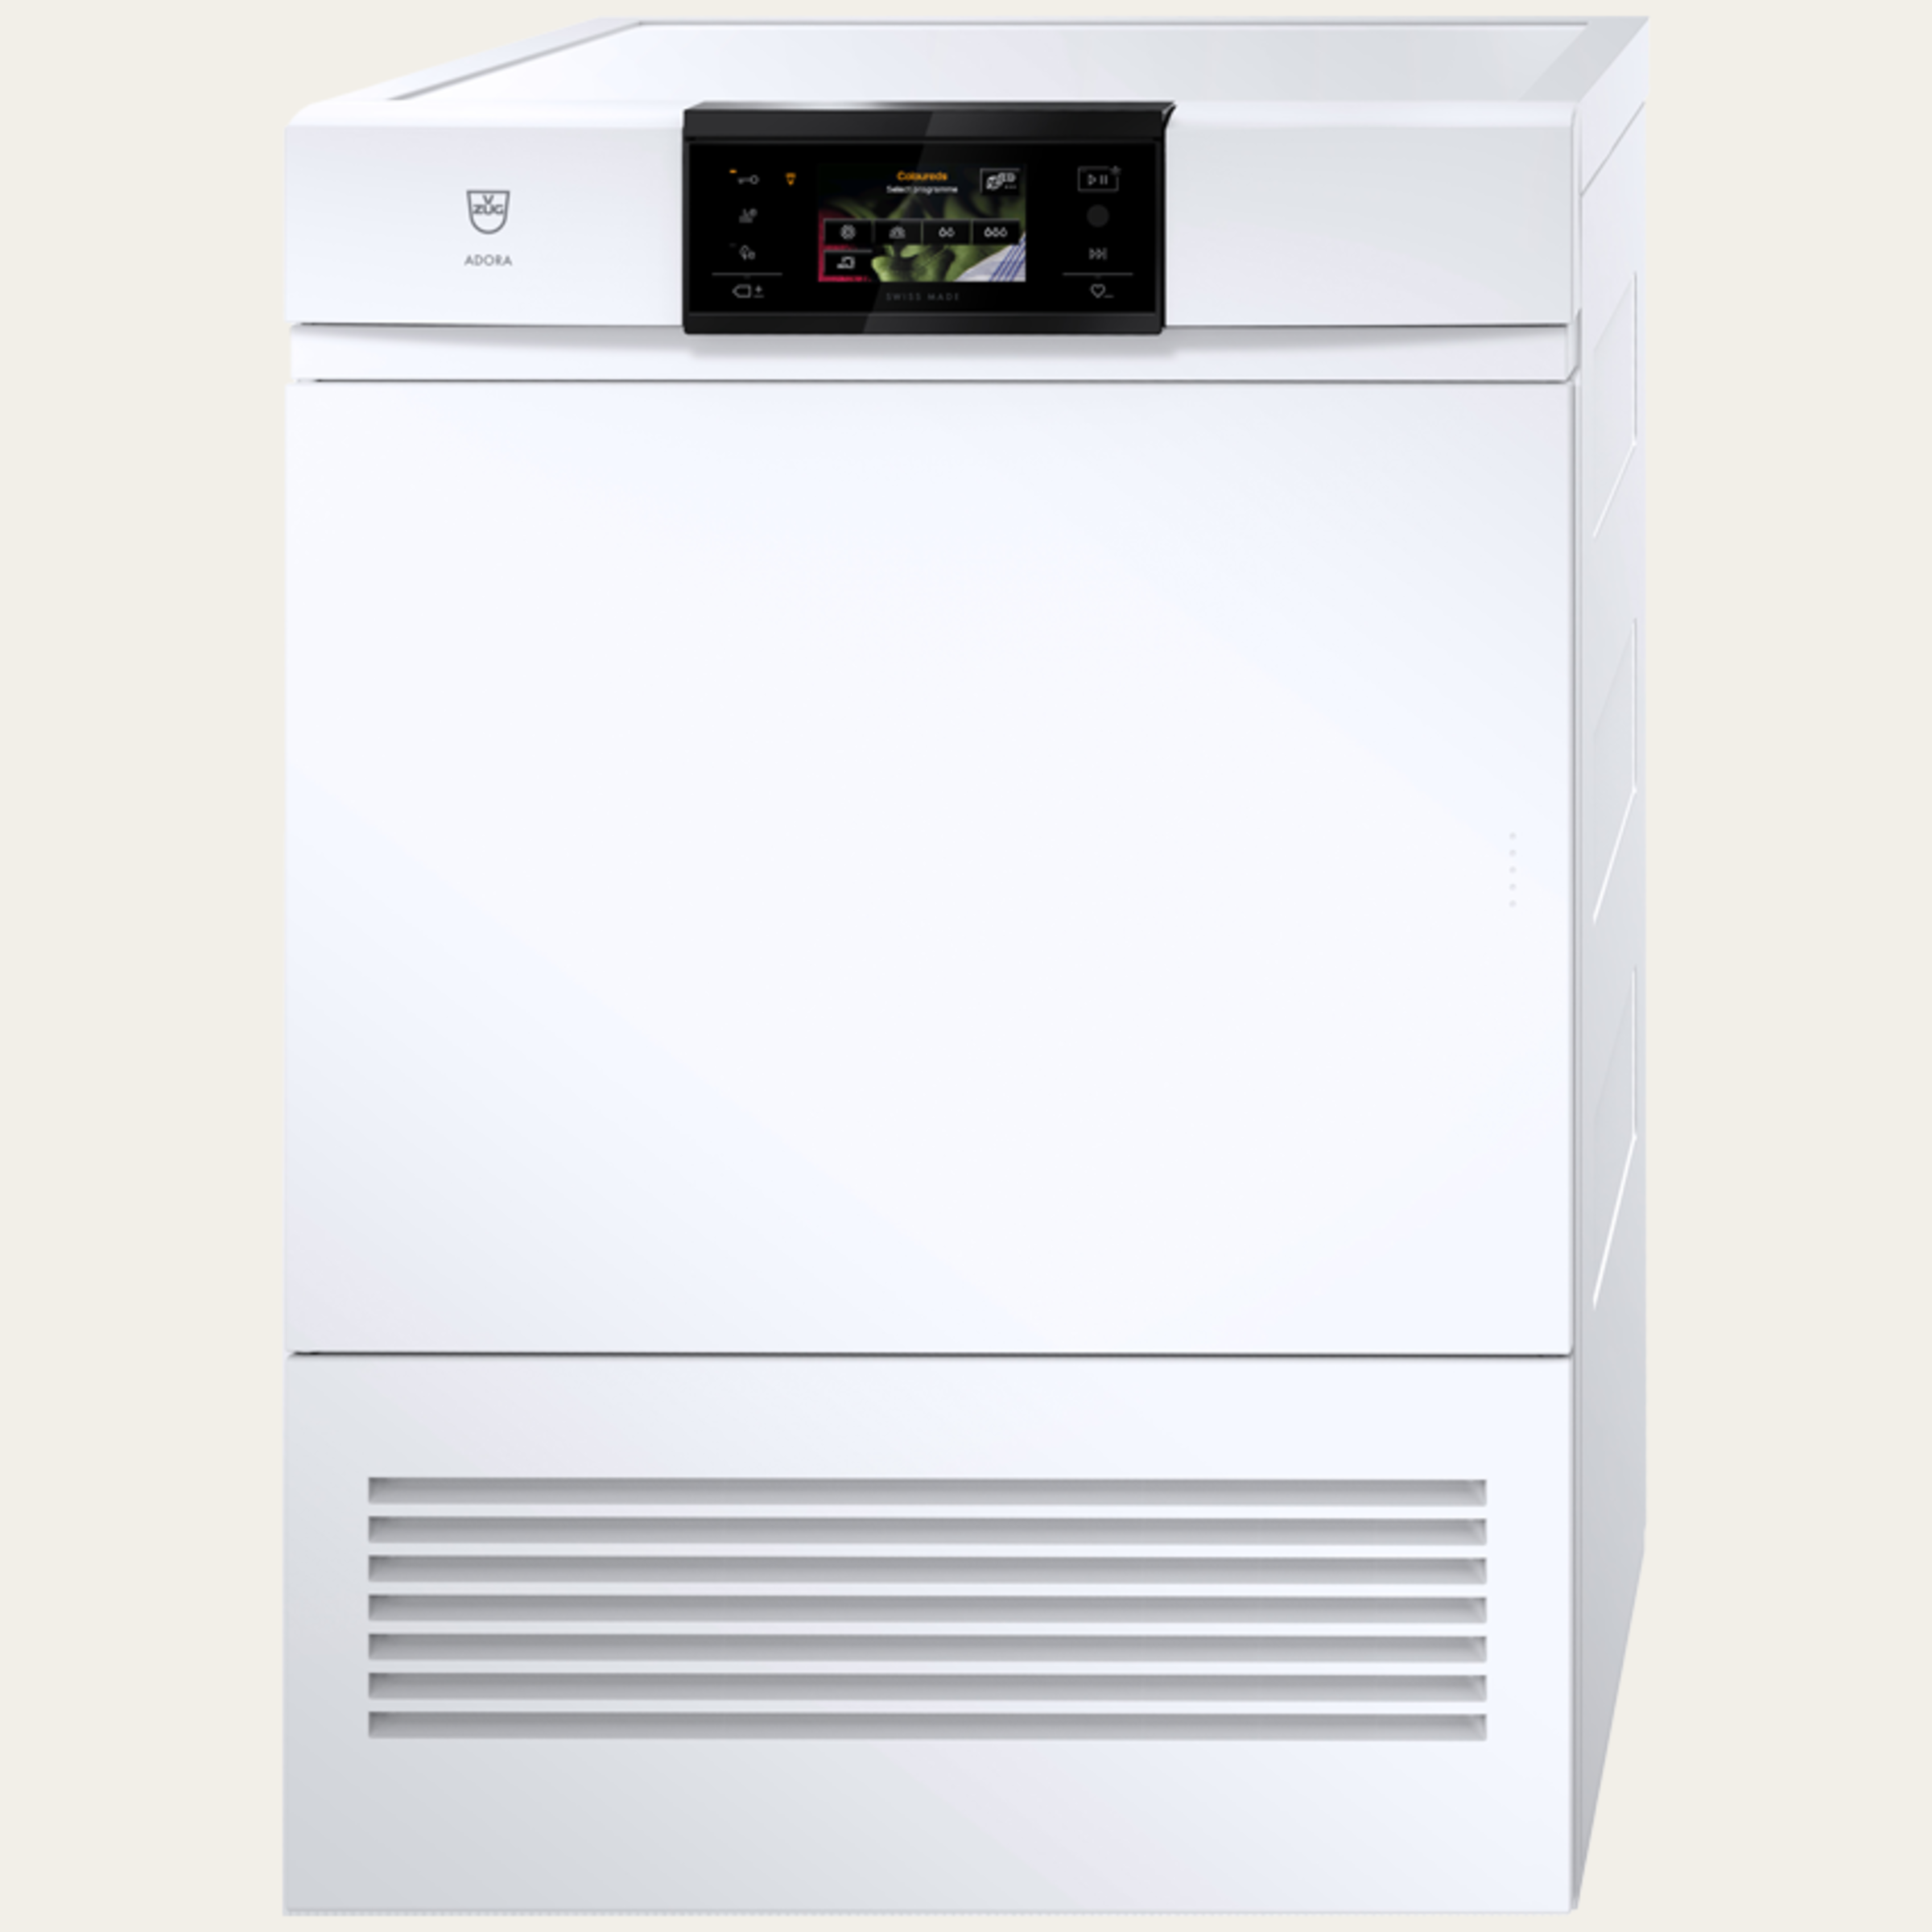 V-ZUG Tumble dryer AdoraDry V6000, Door hinge: Left,V-ZUG-Home, Nominal capacity: 7 kg, Full-colour graphic display, touchscreen, Air transport according to UN 3358 prohibited